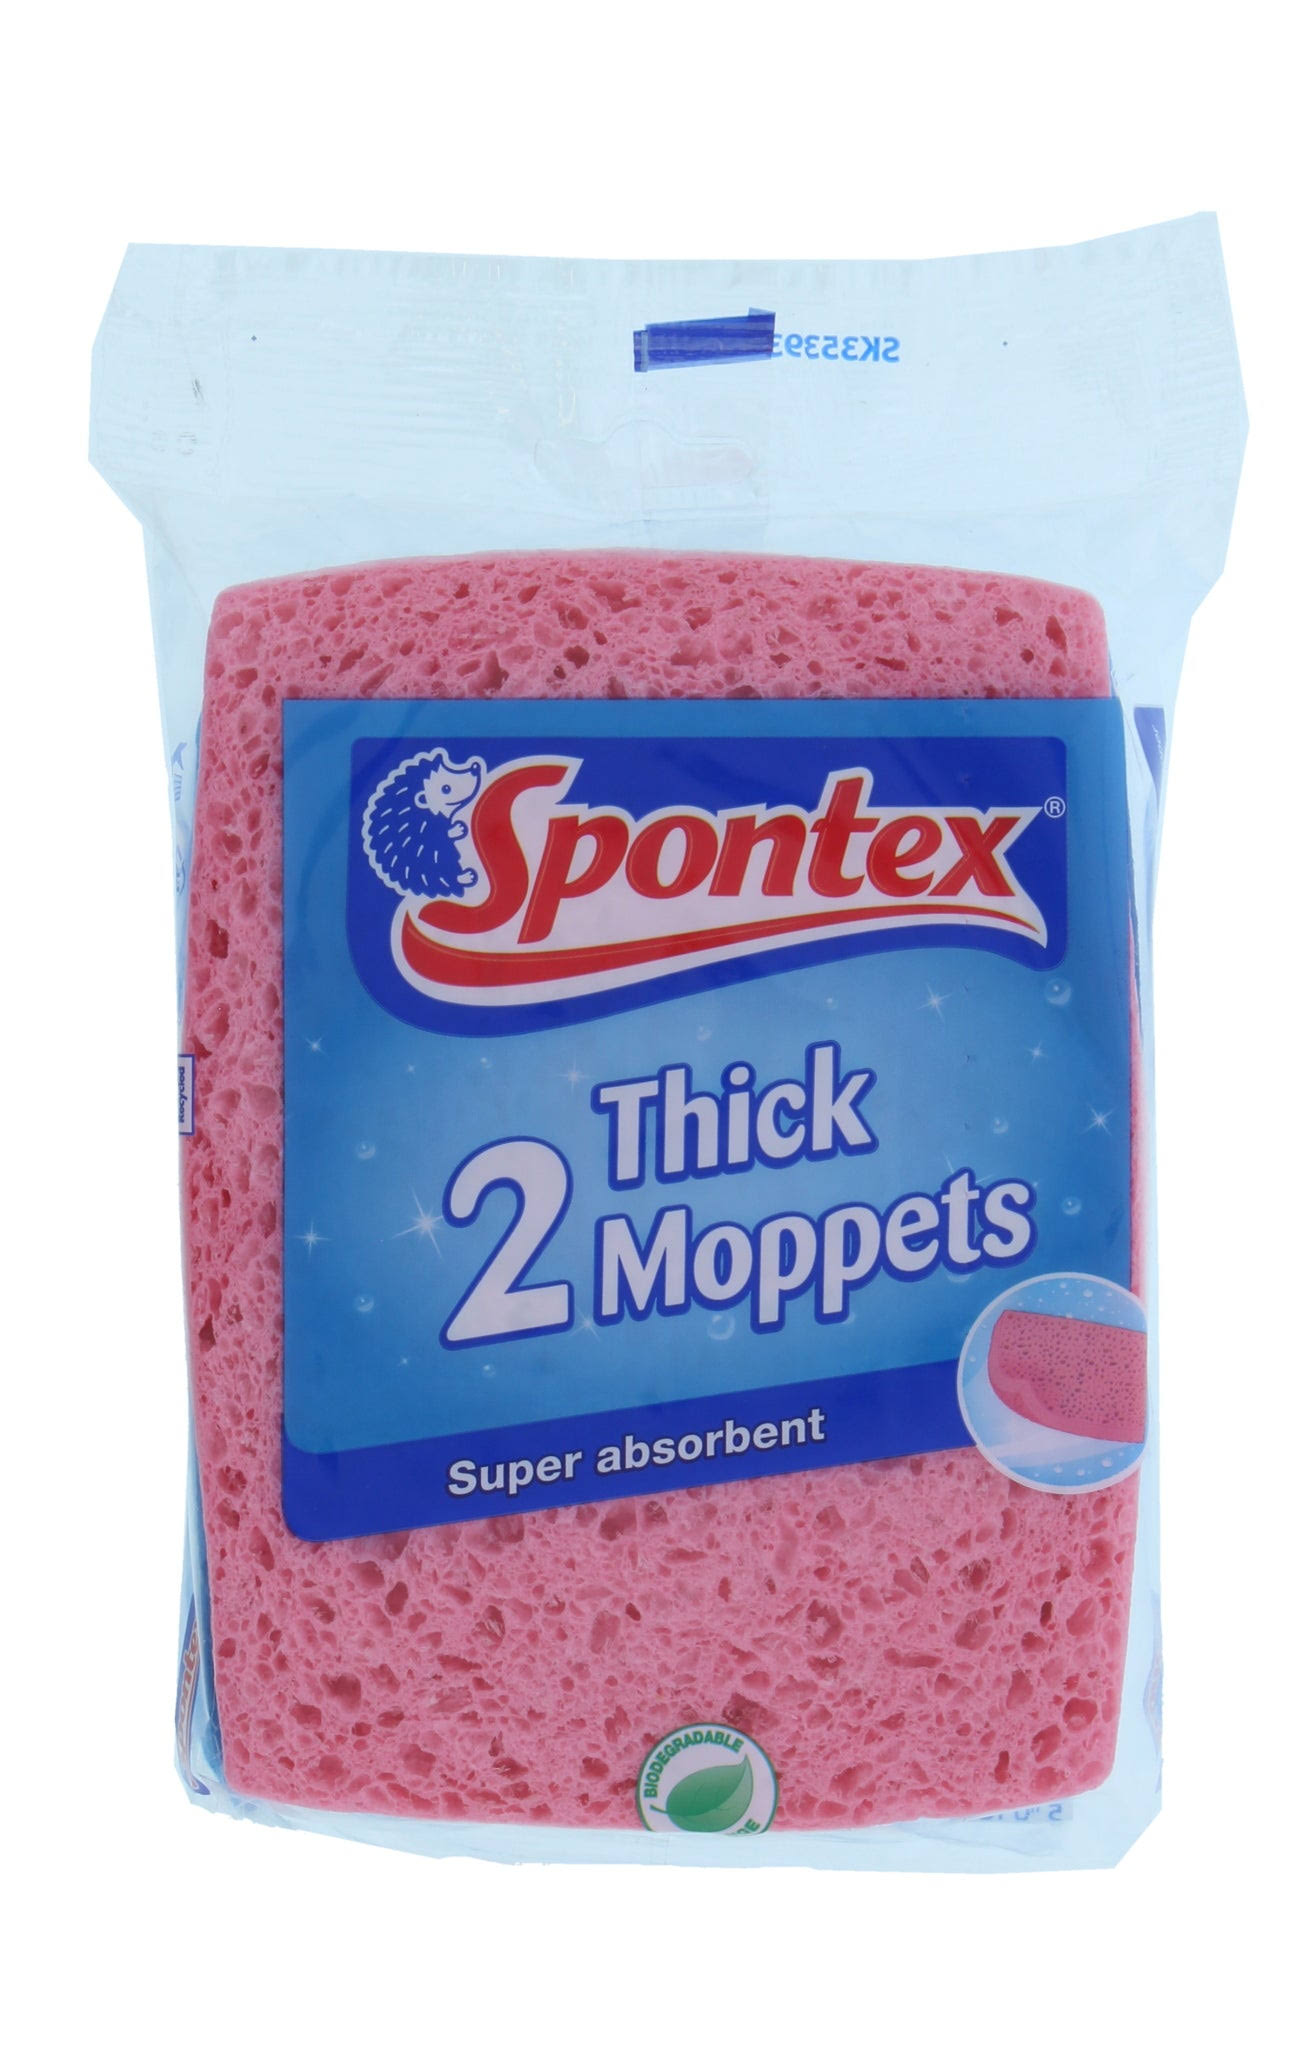 Spontex Thick Moppets - 2 Pack